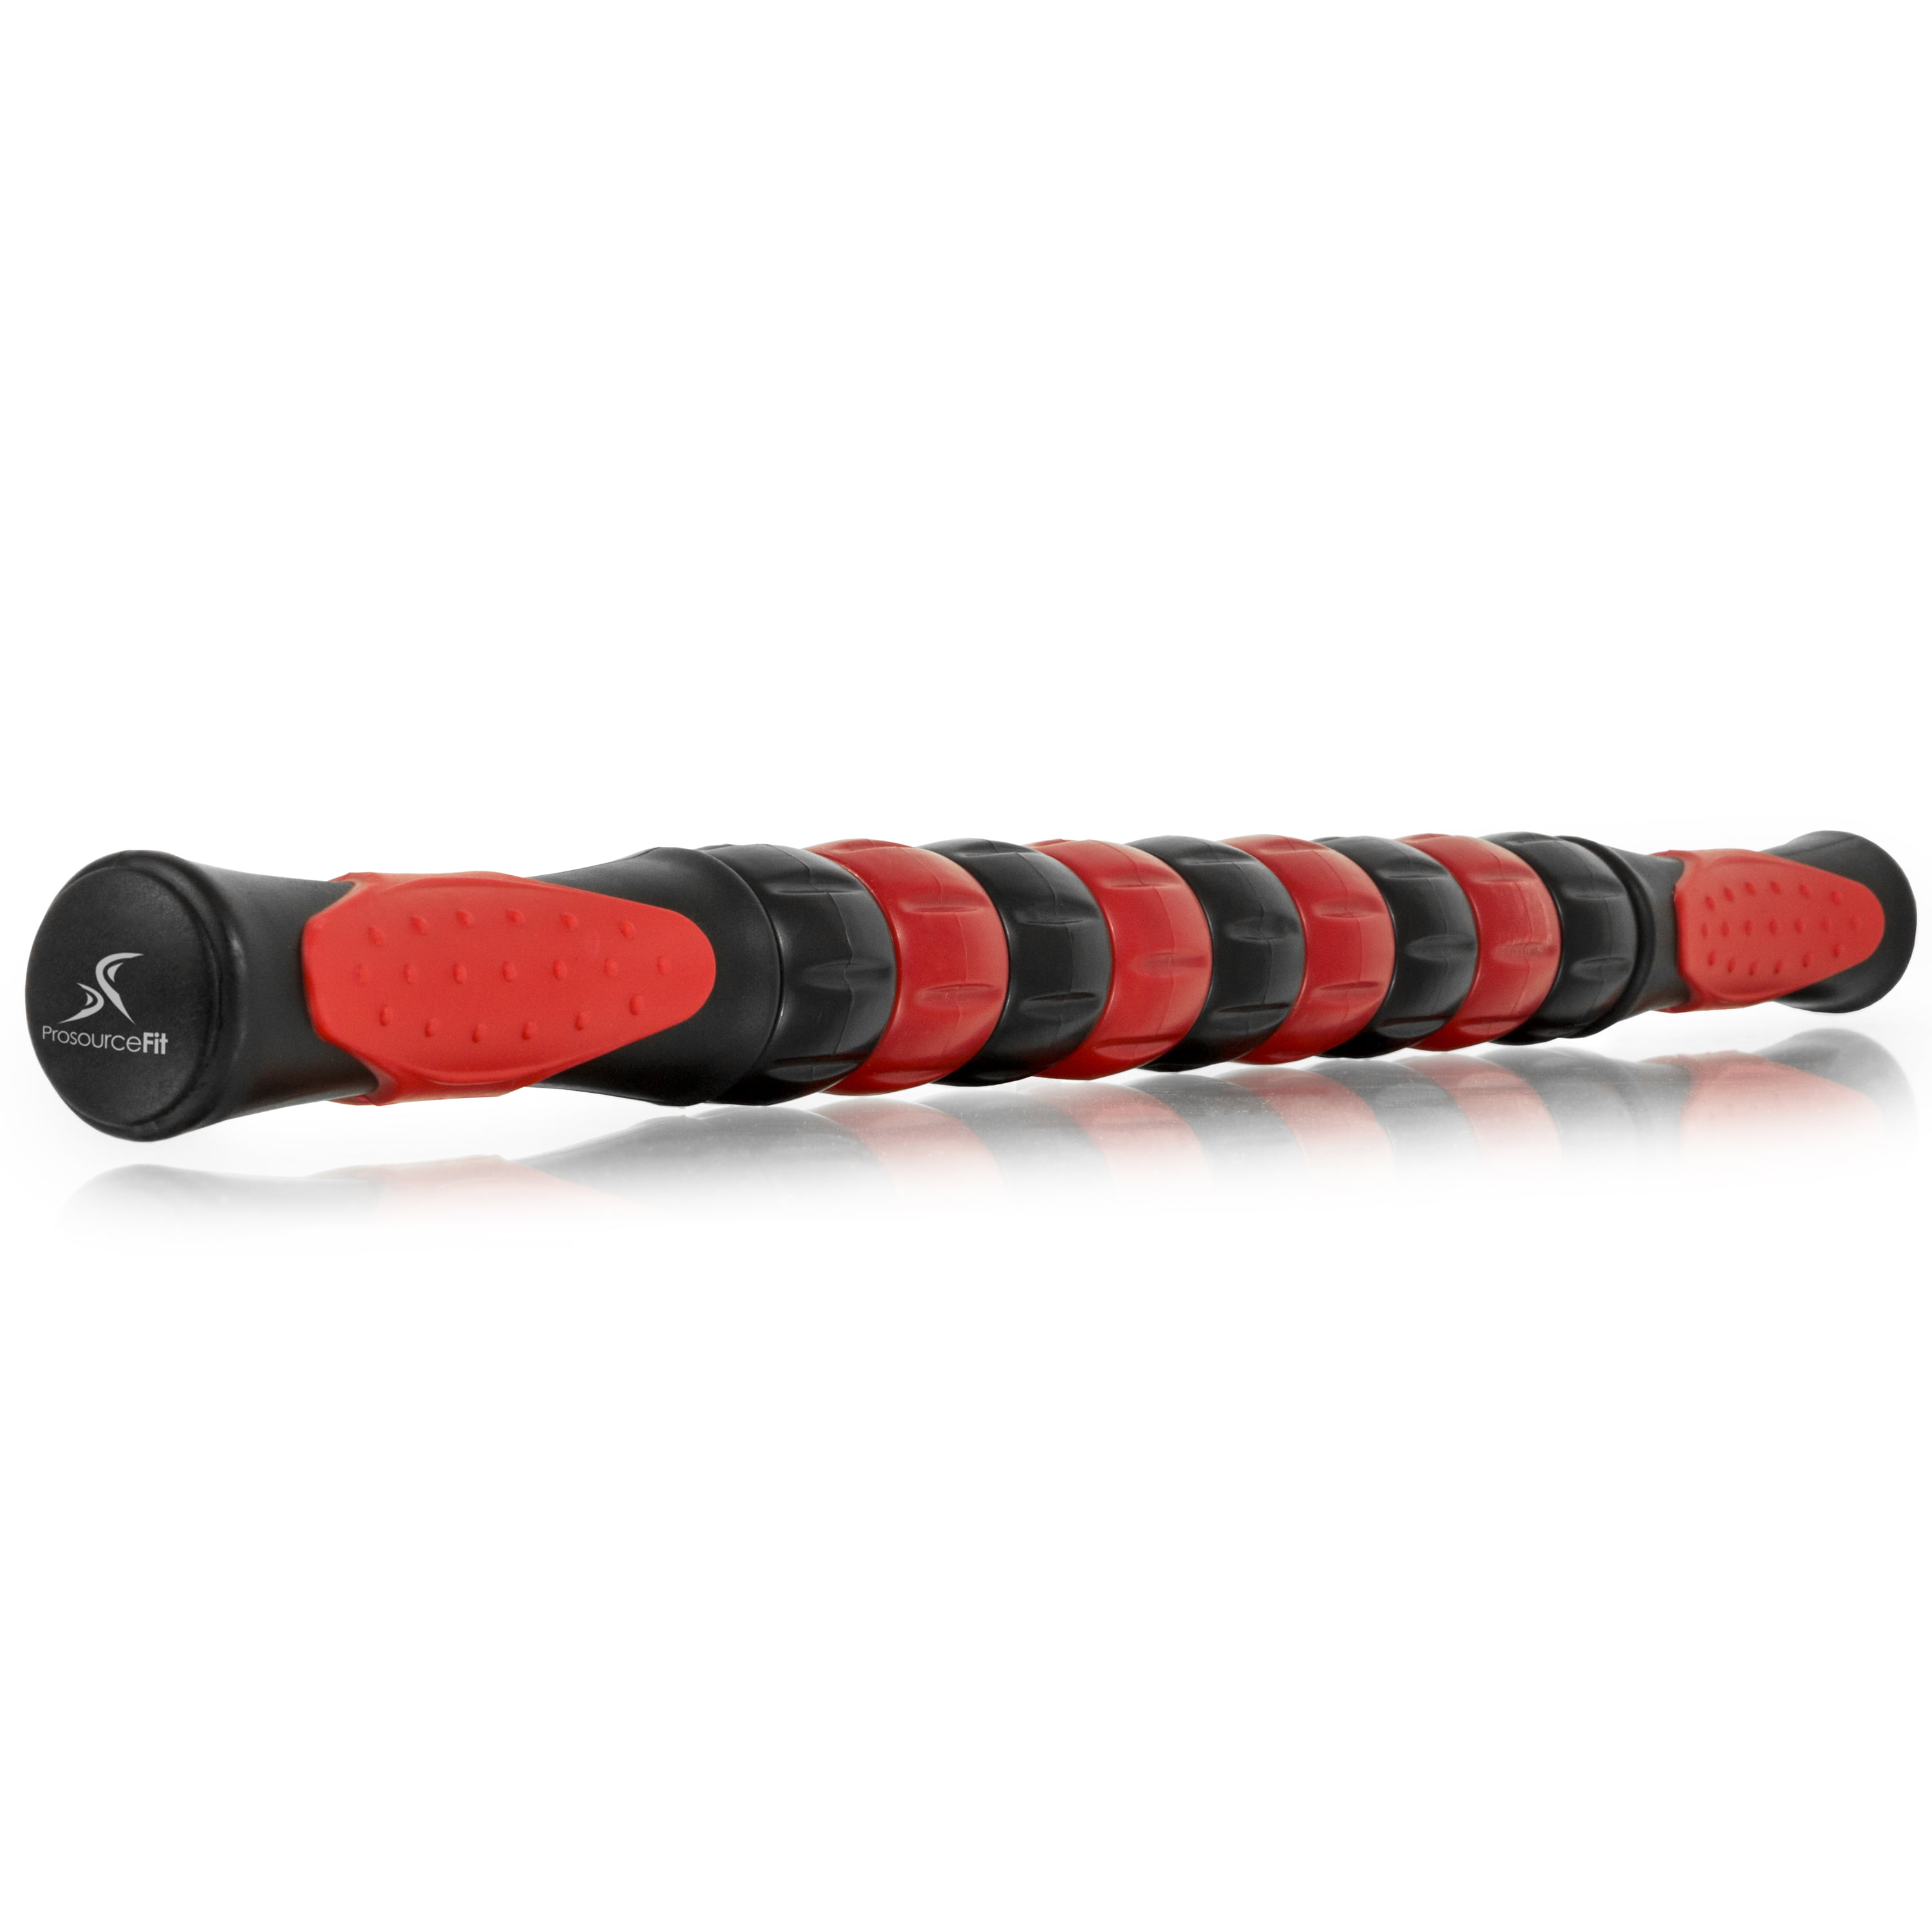 Buy Prosourcefit Massage Stick Roller Portable Self Myofascial Release Tool Online At Lowest